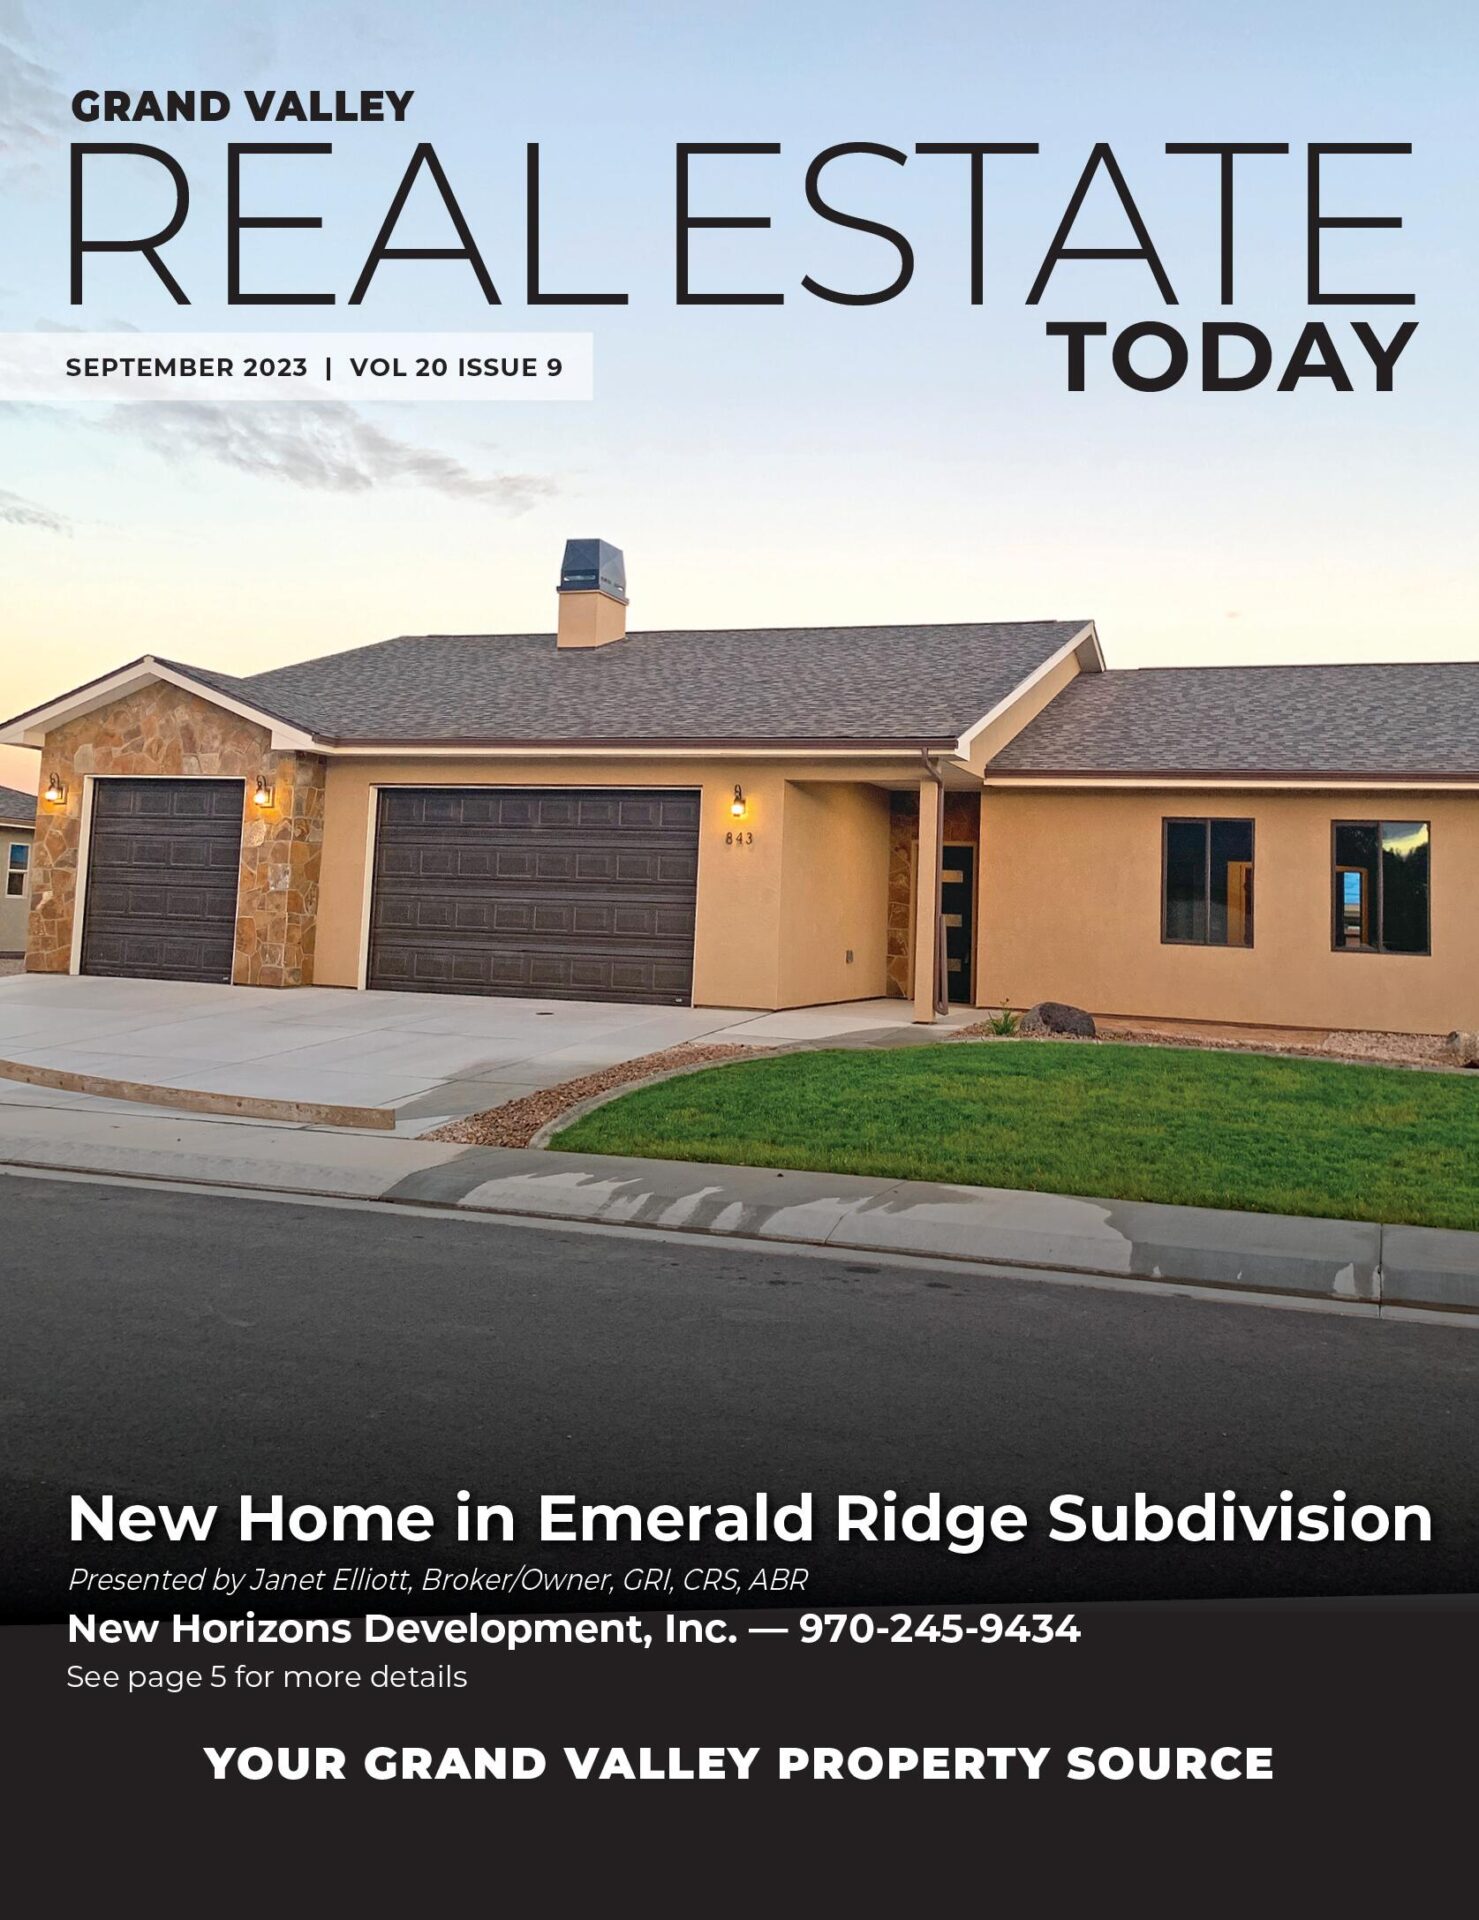 September 2023 Grand Valley Real Estate Today